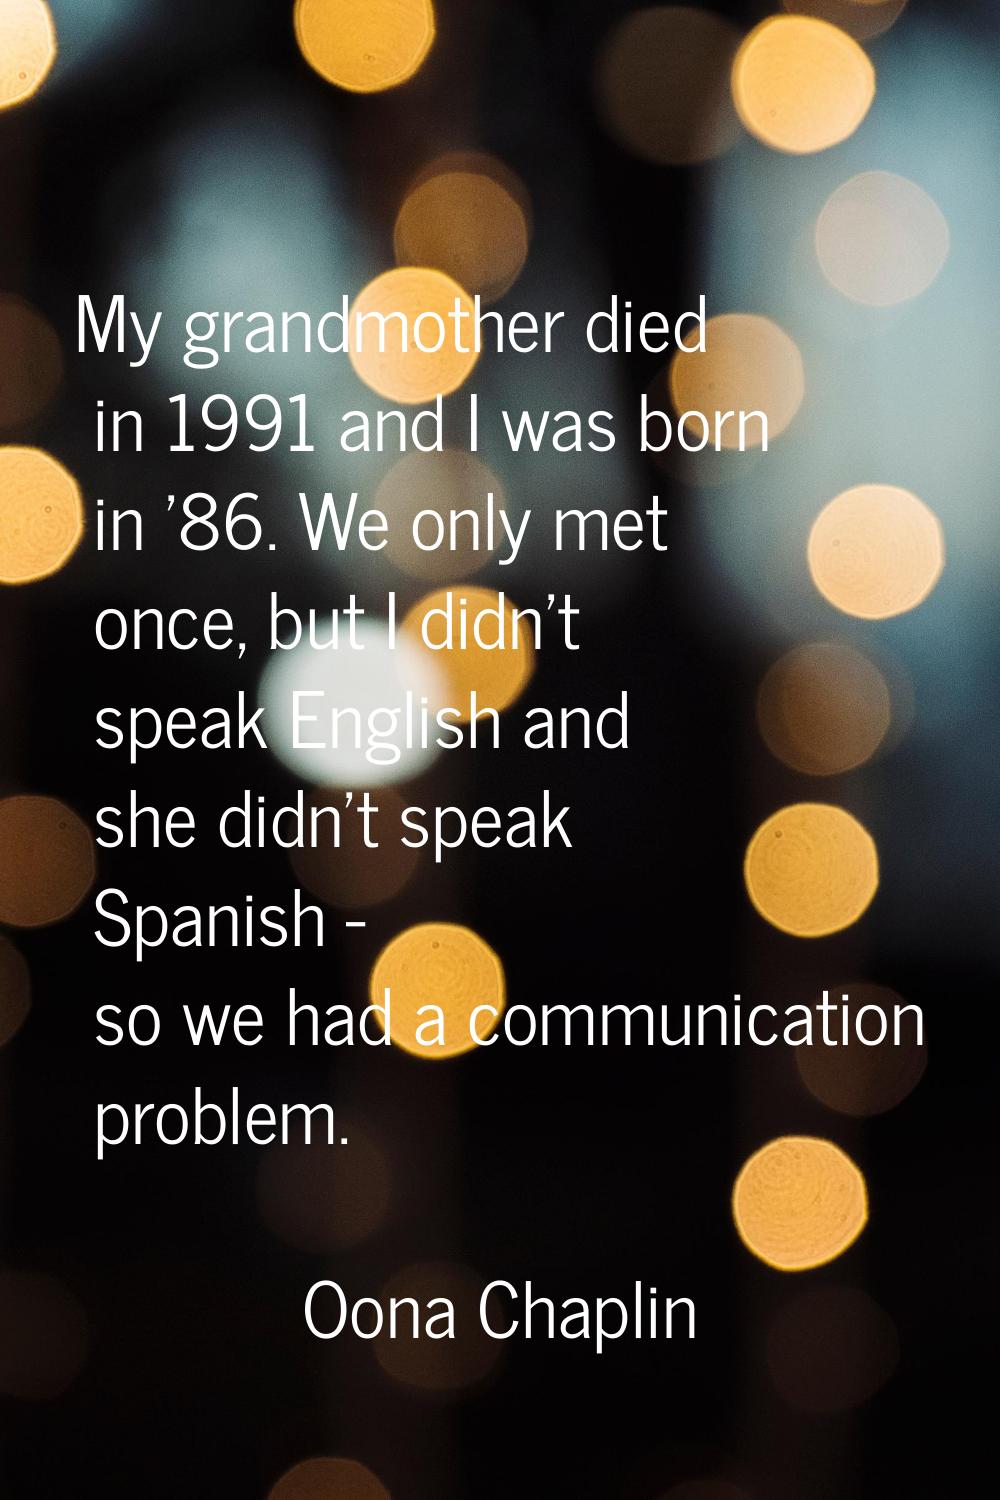 My grandmother died in 1991 and I was born in '86. We only met once, but I didn't speak English and